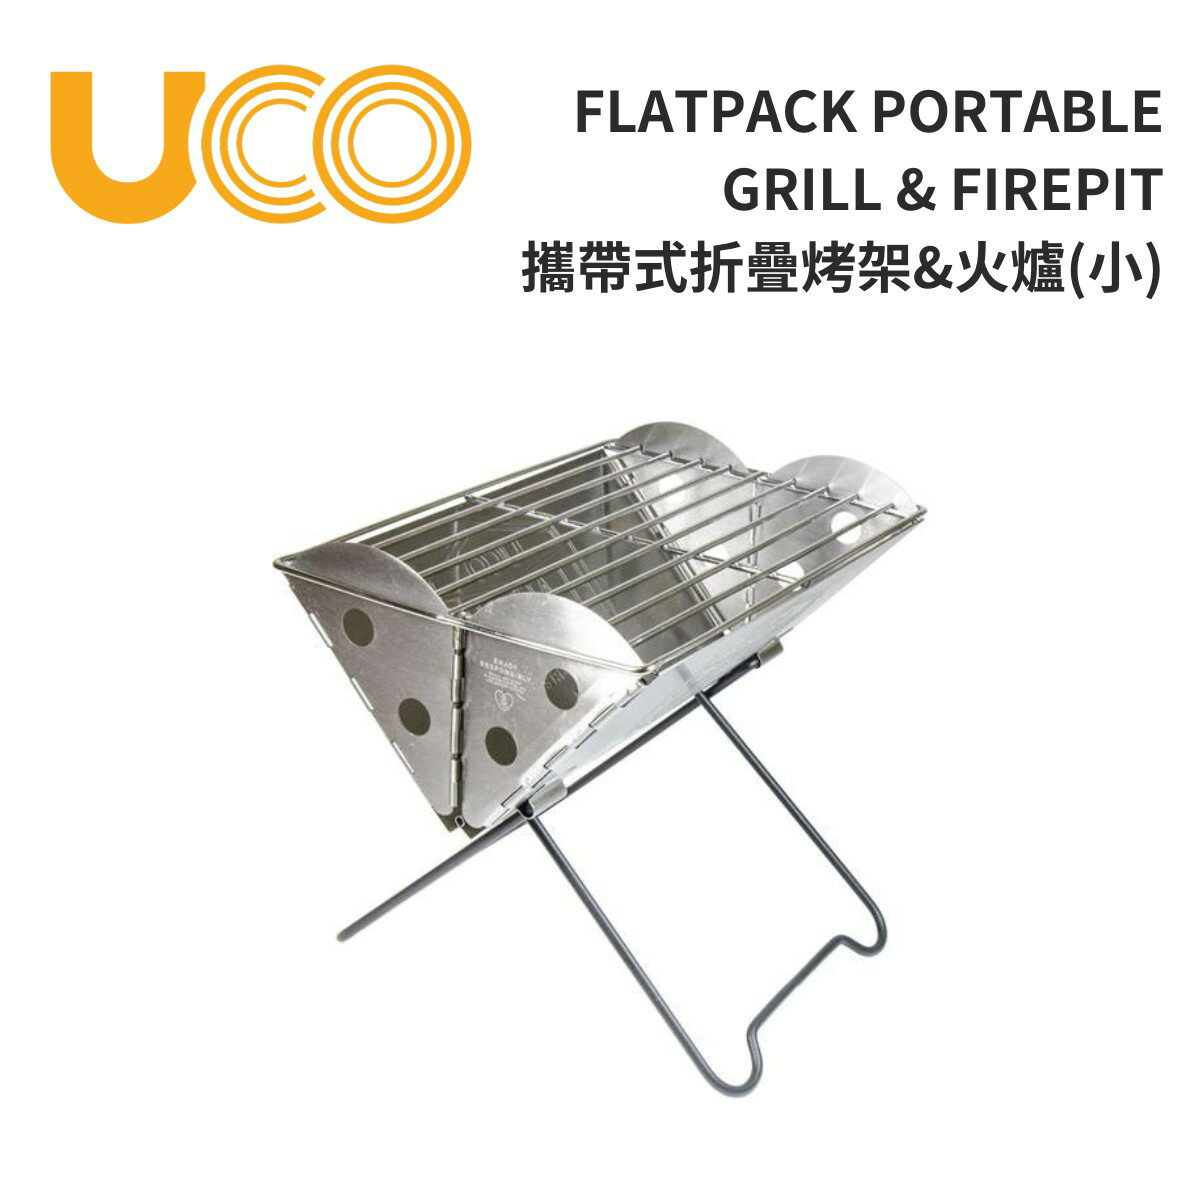 【UCO】攜帶式折疊烤架&火爐(小) Flatpack Portable Grill & Firepit